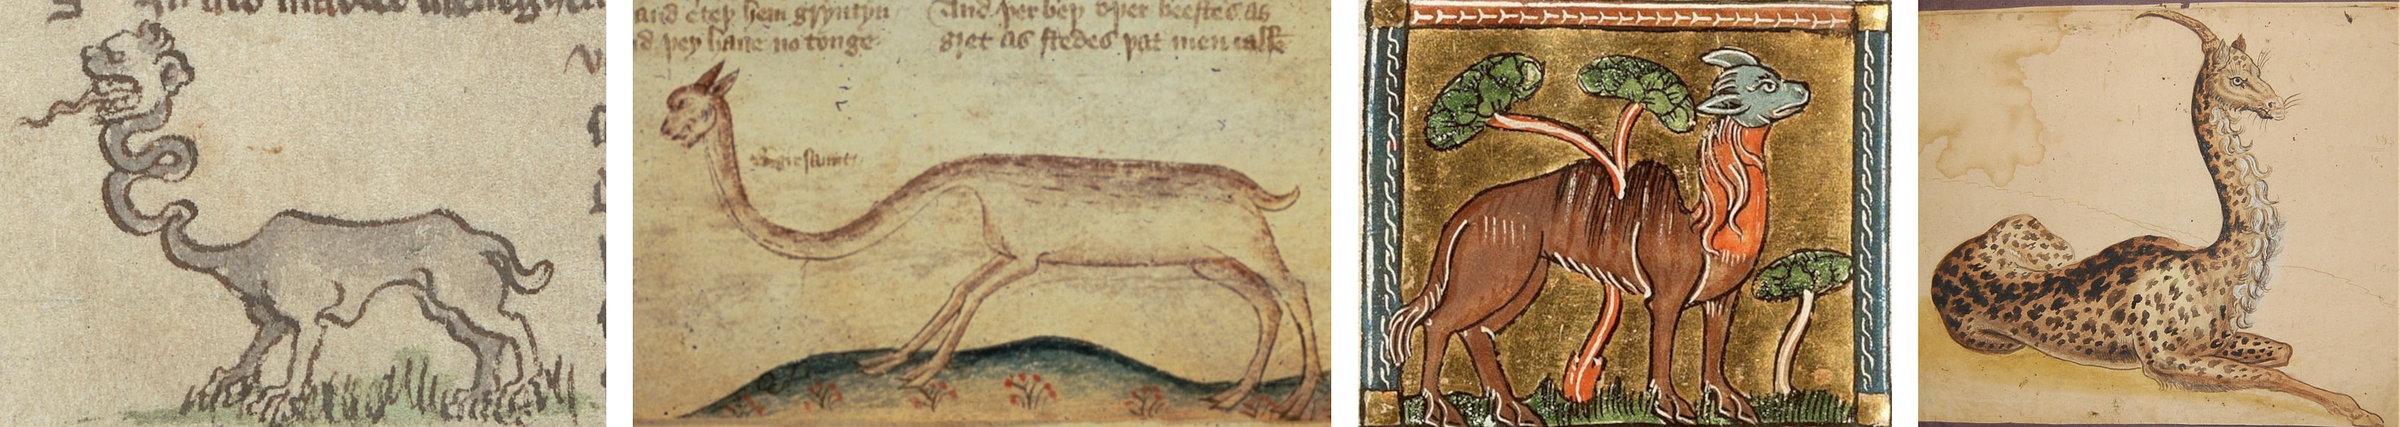 Four medieval and 17th-century illustrations featuring a variety of peculiar animals. One image portrays a creature with a dog-like body, short tail, and an incredibly long, snakelike neck with a lion-like head and an open mouth. Calligraphy lettering accompanies the illustration. Another drawing showcases a crude depiction of a giraffe with a deer-like body, long legs, and a thin, curving neck. Its head resembles a rabbit with a dog-like mouth. A medieval manuscript displays an animal with a camel-like body, blue dog-like head, and two humps on its back, surrounded by trees and gold-painted background. The final image depicts a pretty but too-graceful giraffe lying on the ground, with a leopard-like body, a gently curved neck, and a horn extending from the back of its head.